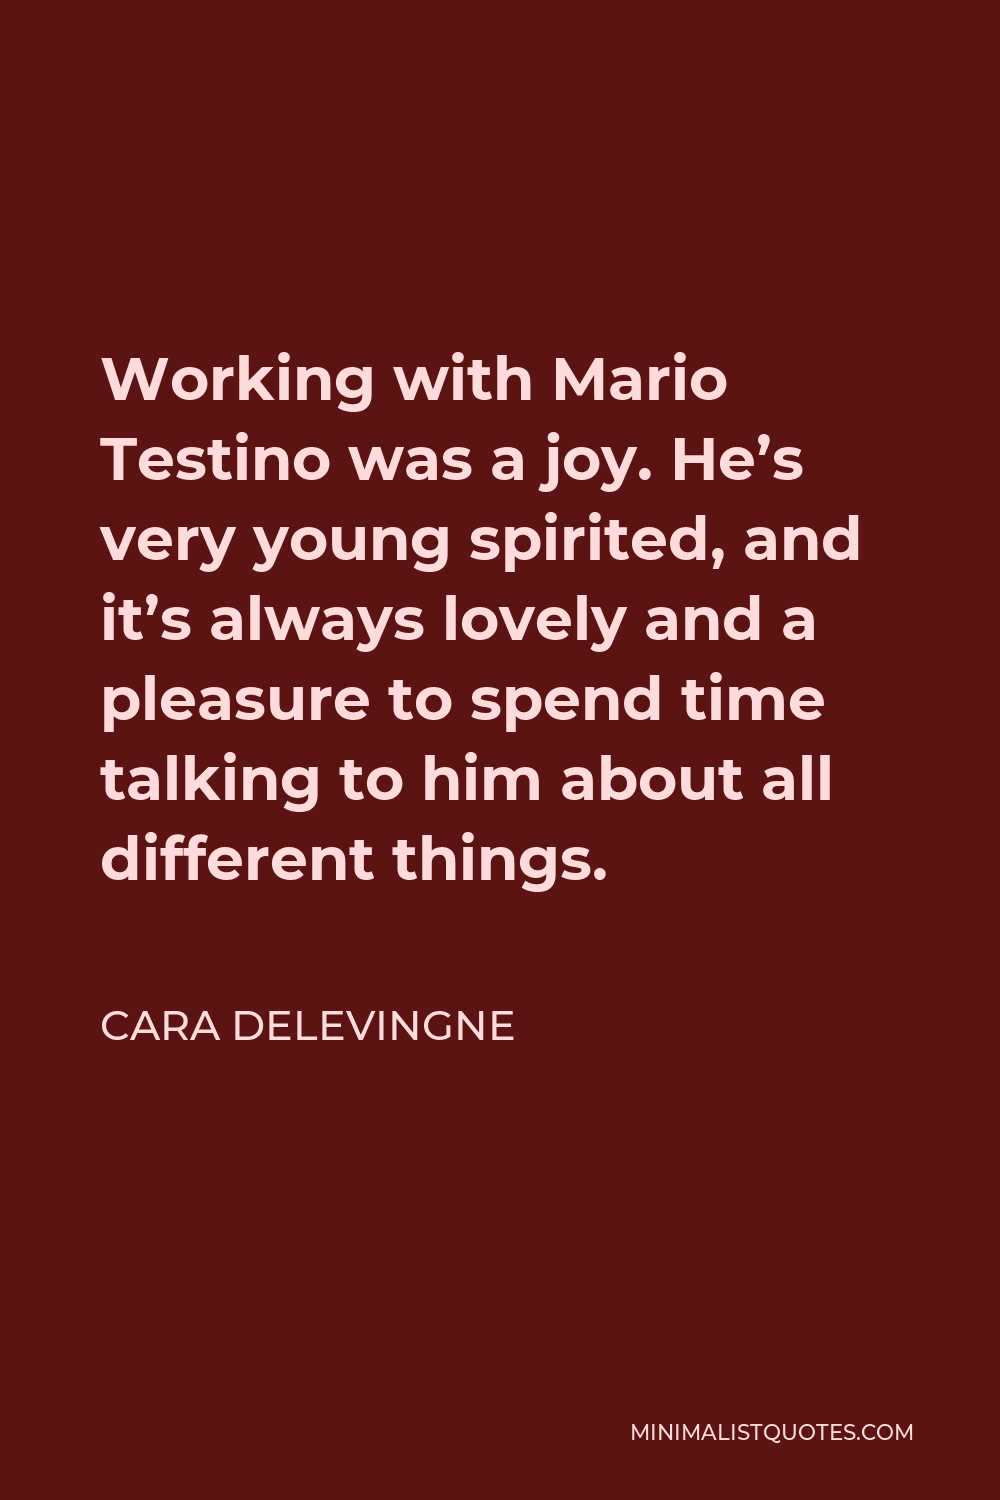 Cara Delevingne Quote - Working with Mario Testino was a joy. He’s very young spirited, and it’s always lovely and a pleasure to spend time talking to him about all different things.